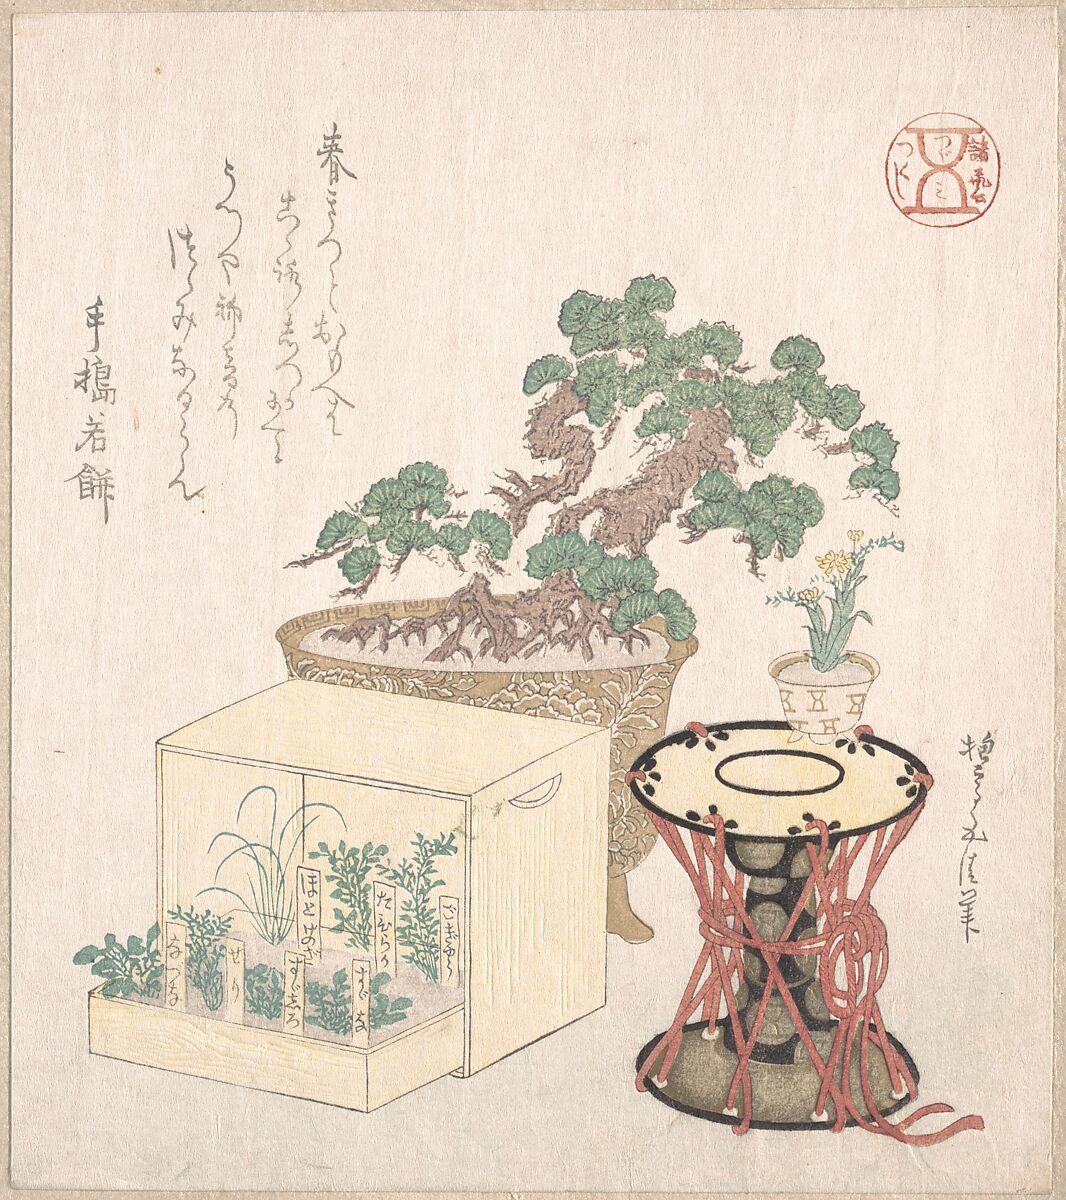 Potted Pine Tree Drum and Seven Herbs Planted in a Box, Sunayama Gosei (Japanese, 18th–19th century), Woodblock print (surimono); ink and color on paper, Japan 